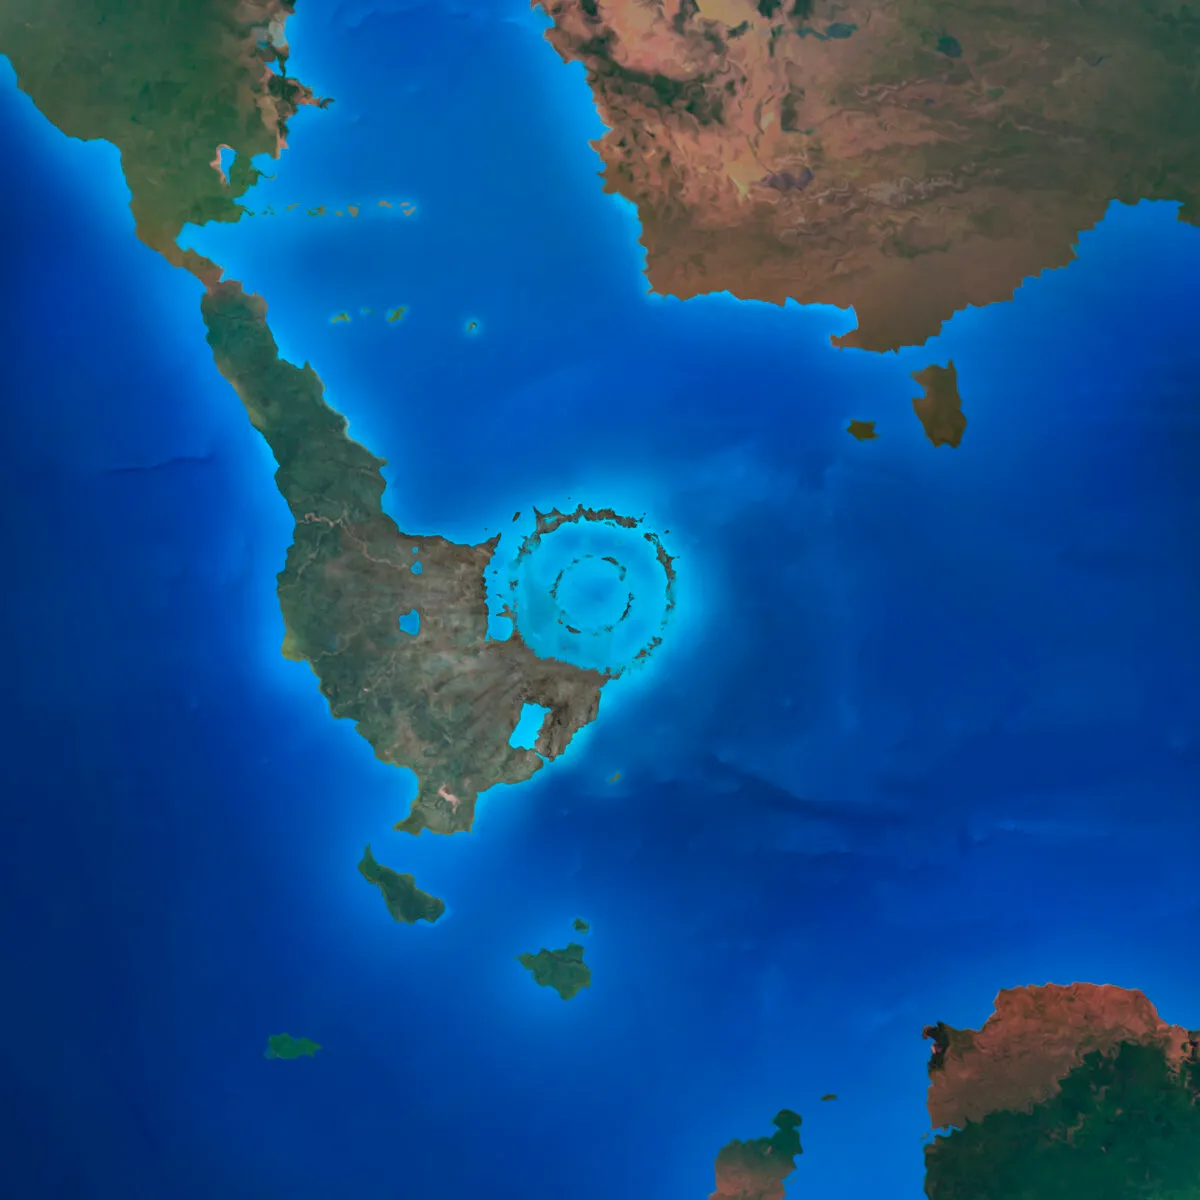 An illustration showing the location of the Chicxulub crater, shortly after its formation. The Chicxulub crater is thought to be the impact scar left over from the asteroid that wiped out the dinosaurs and other species on Earth. Credit: Mark Garlick / Science Photo Library